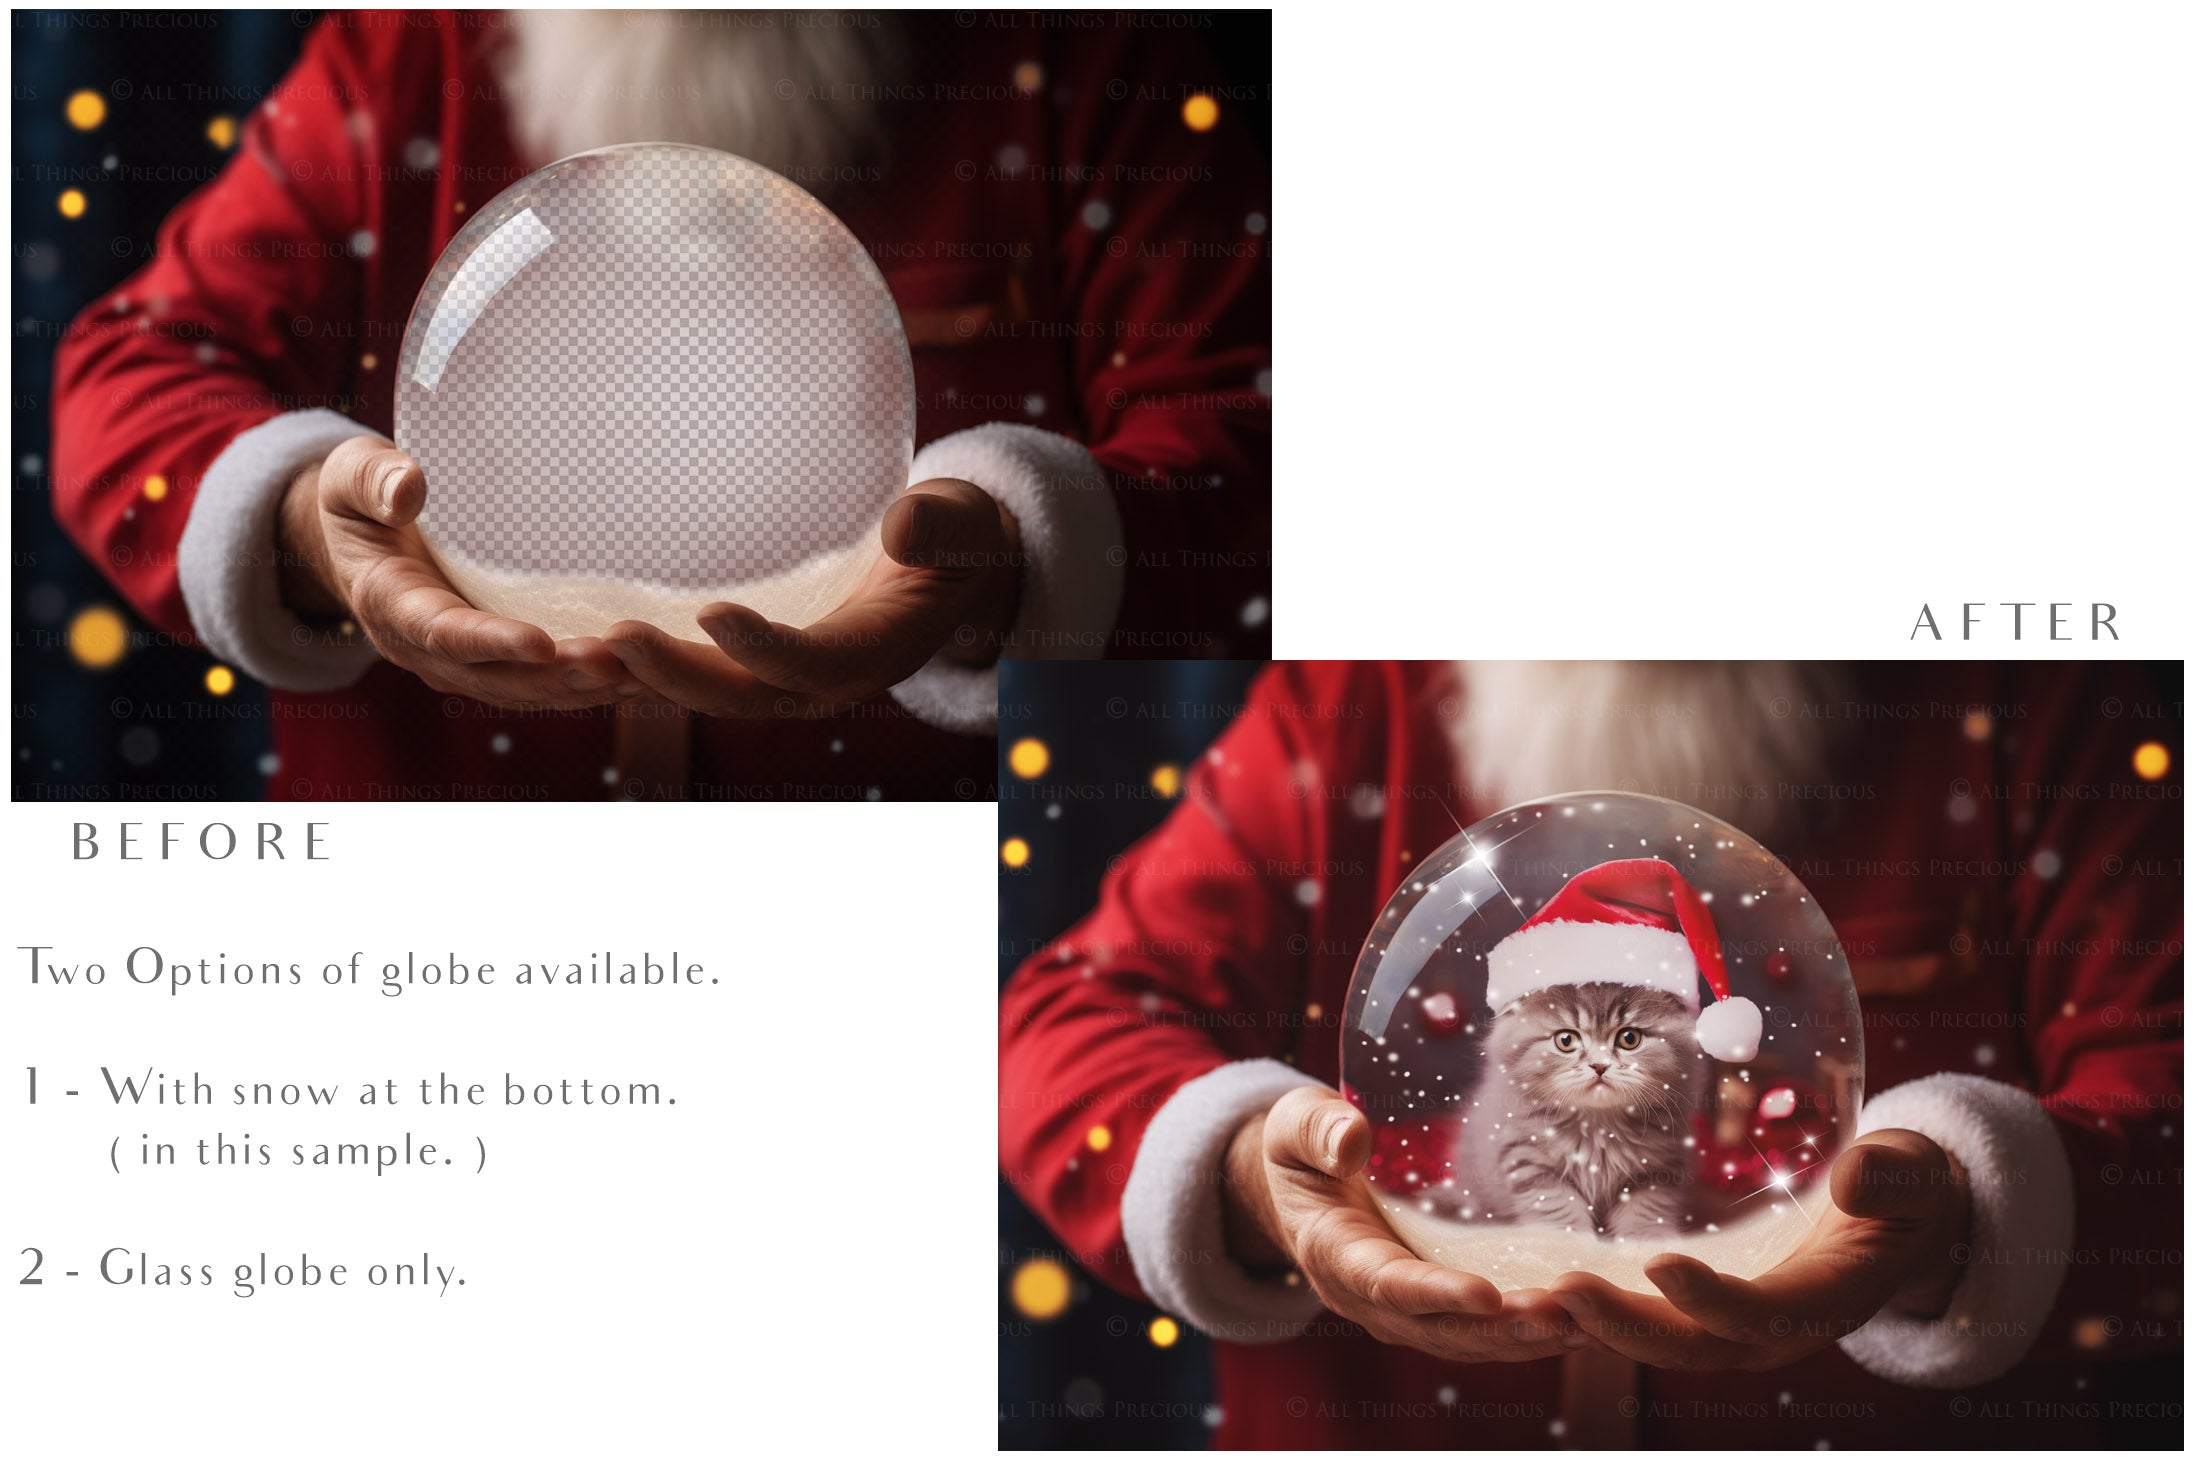 Digital Snow Globe Background, with snow flurries and a PSD Template included in the set.The globe is transparent, perfect for adding your own images and retain the glass  effect.The file is 6000 x 4000, 300dpi. Png Included.